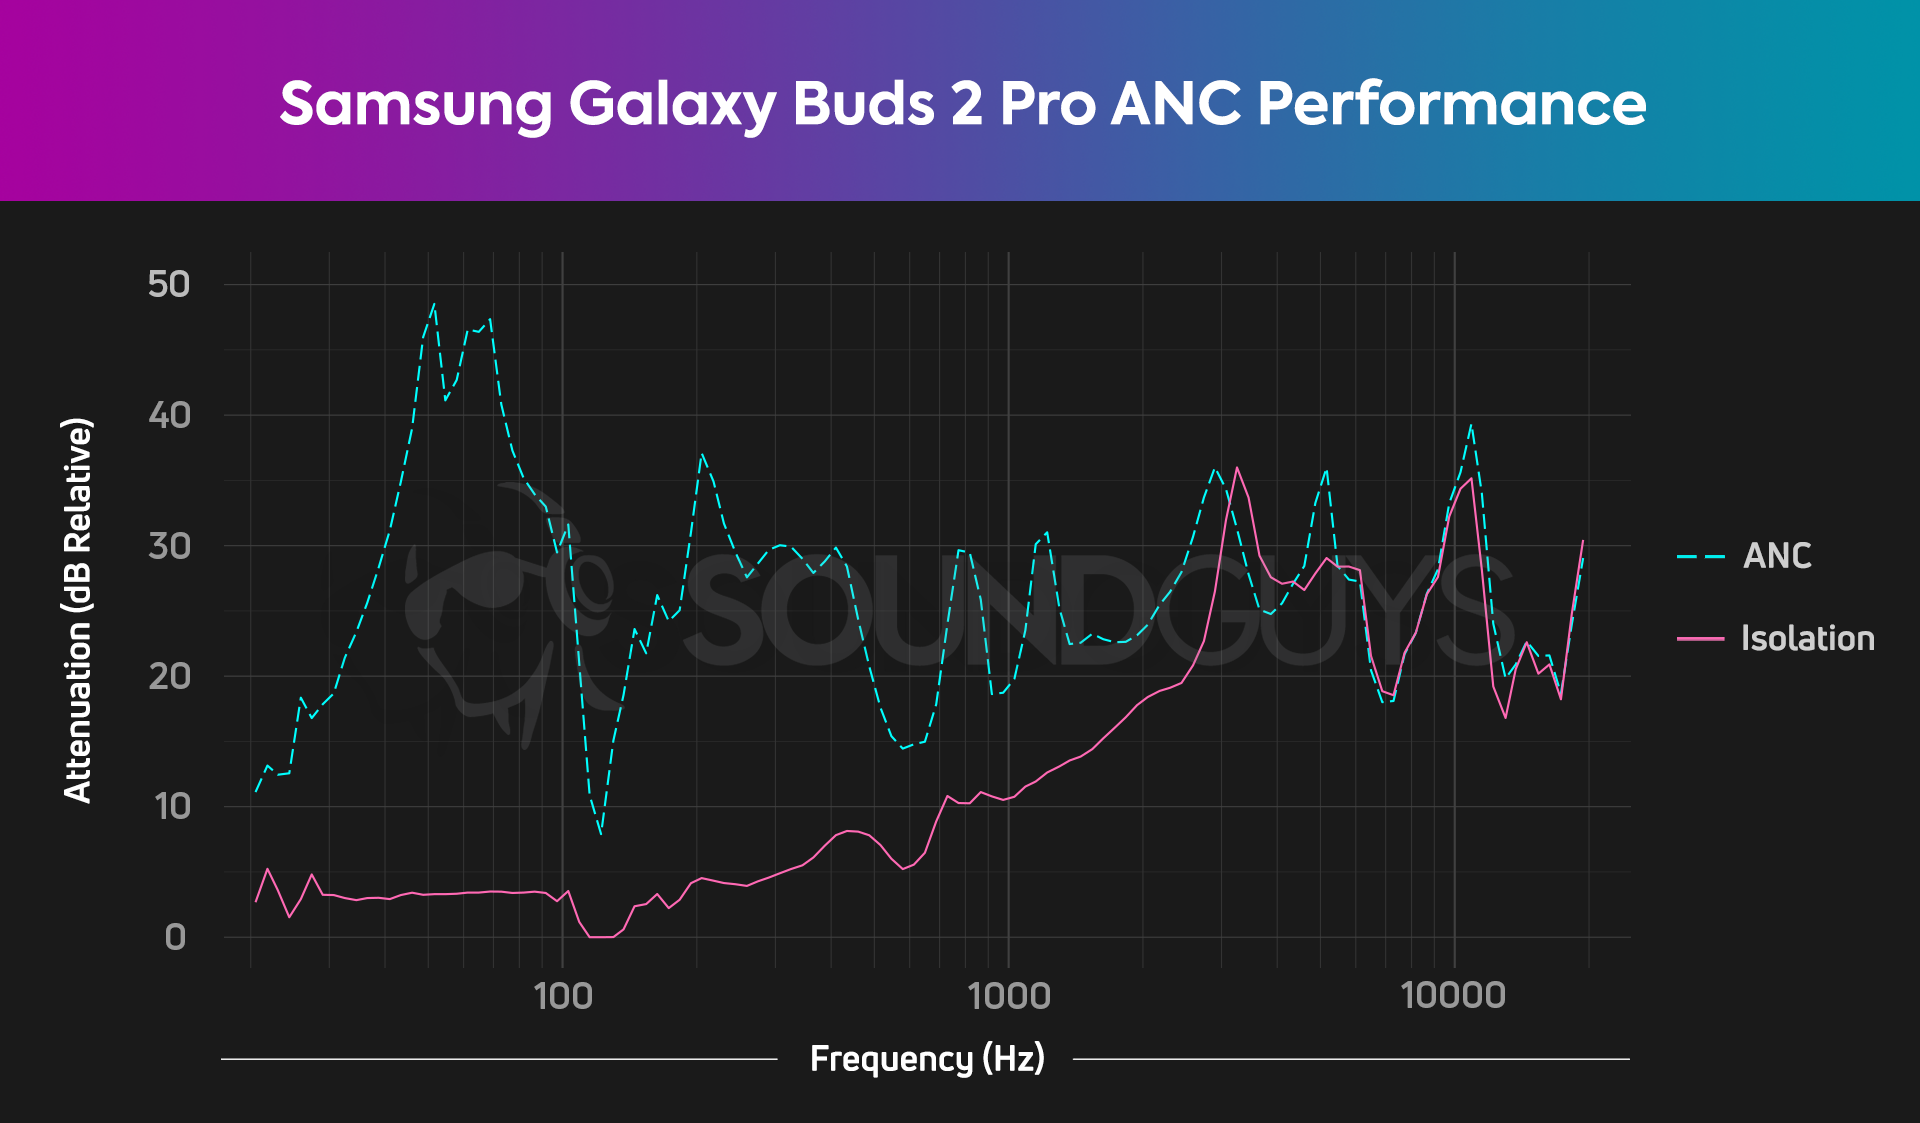 A chart depicts the very impressive ANC and isolation performance of the Samsung Galaxy Buds 2 Pro.